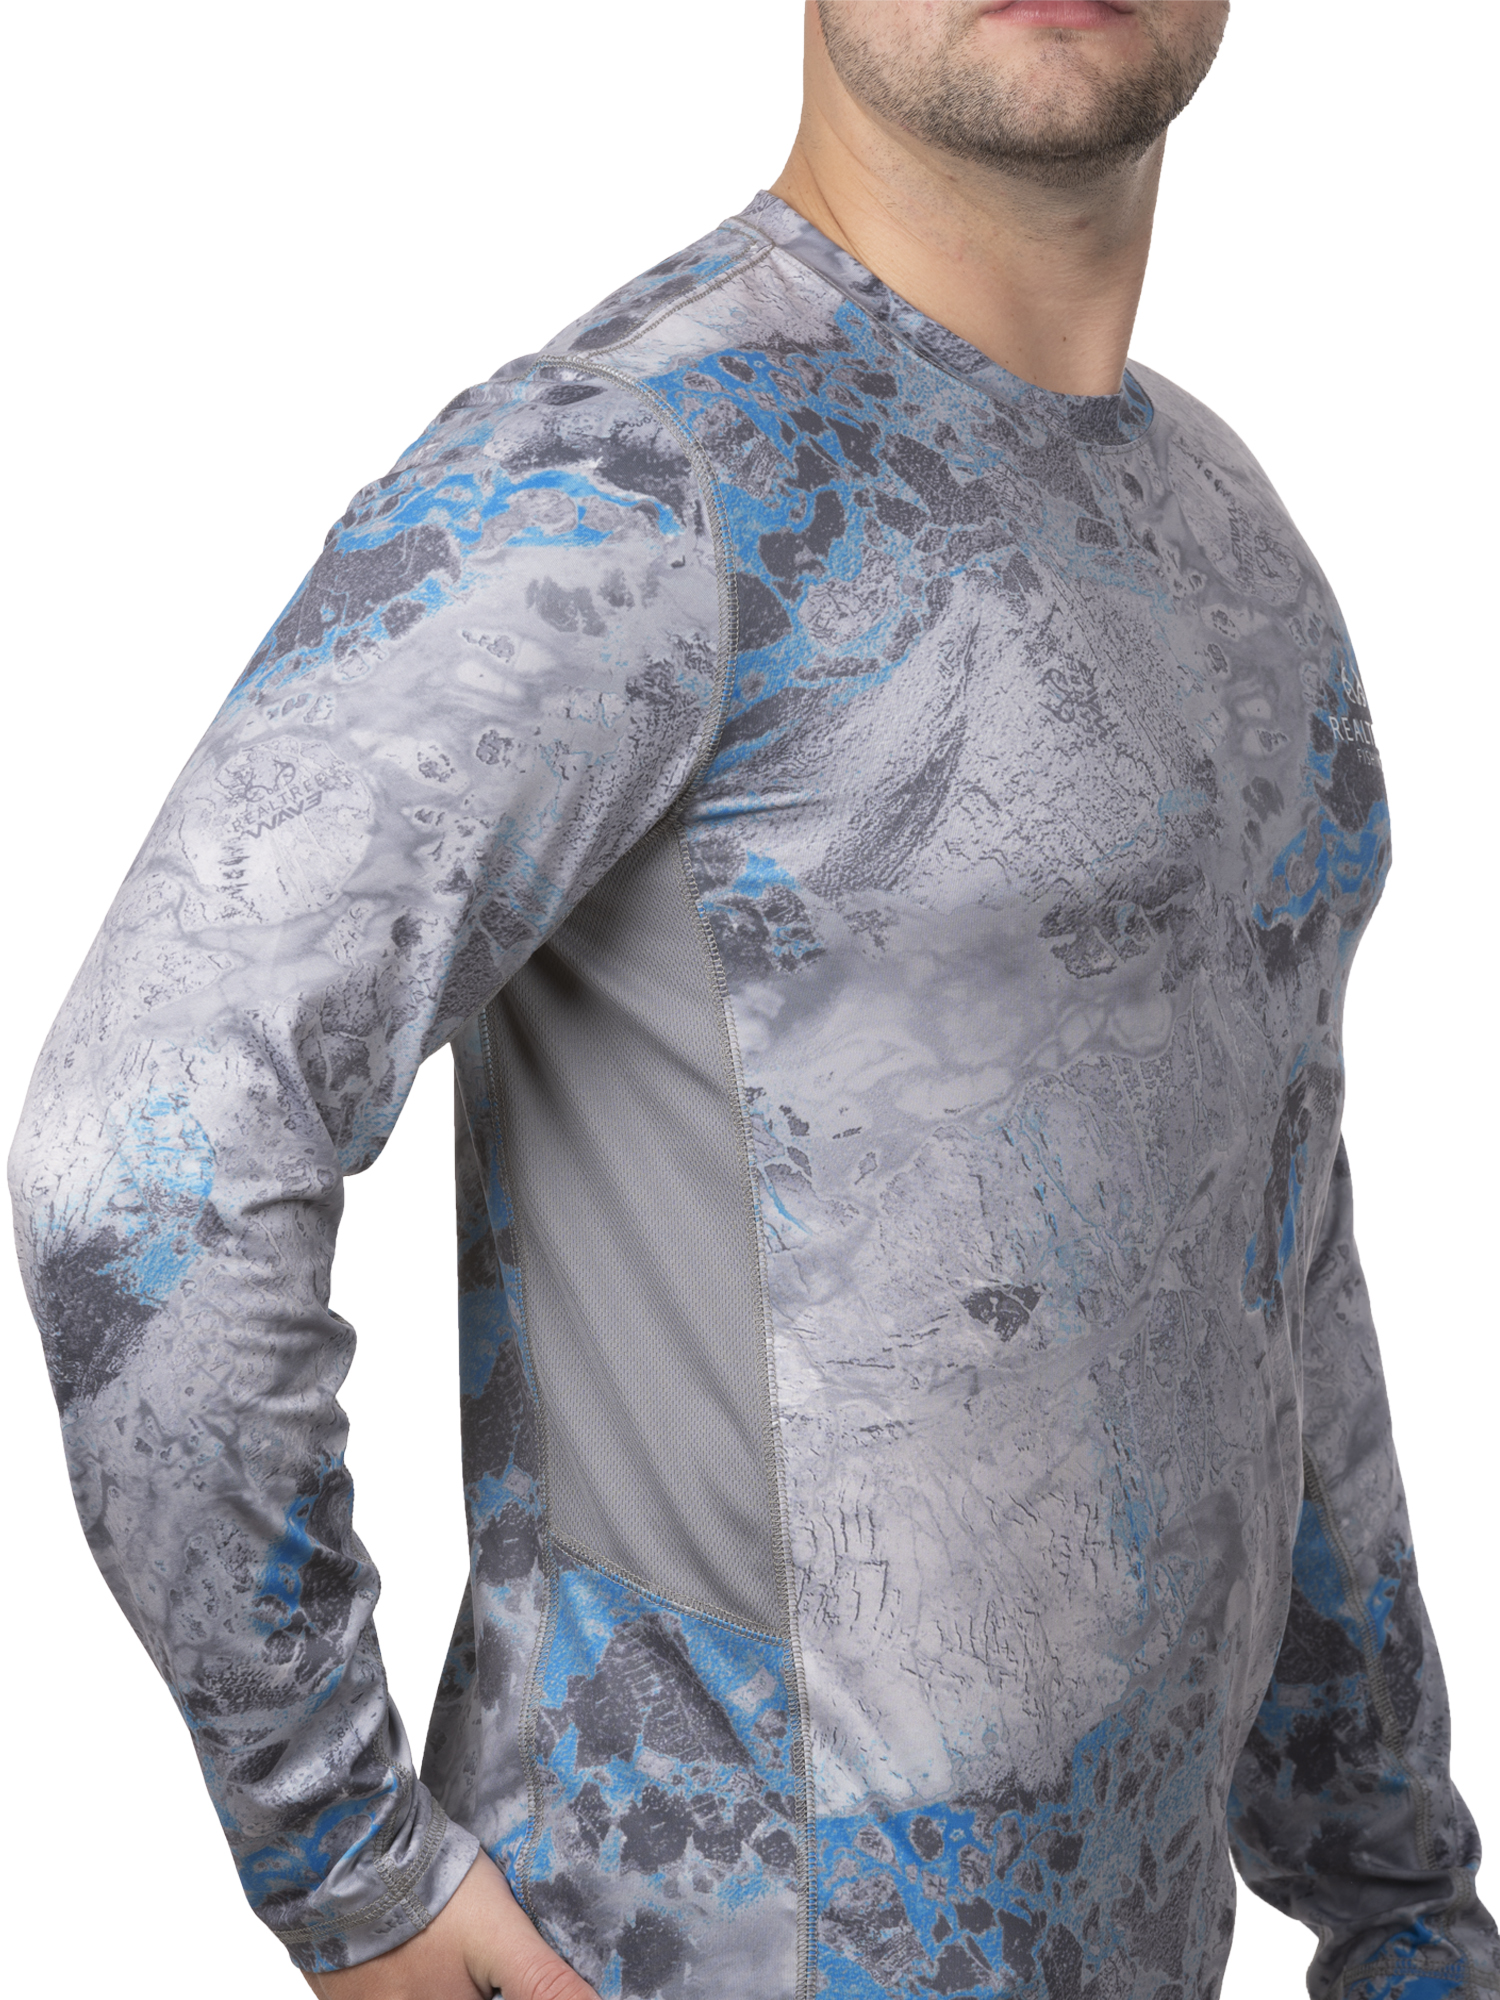 Realtree Long Sleeve Pullover Crew Neck Relaxed Fit T-Shirt (Men's) 1 Pack - image 2 of 3